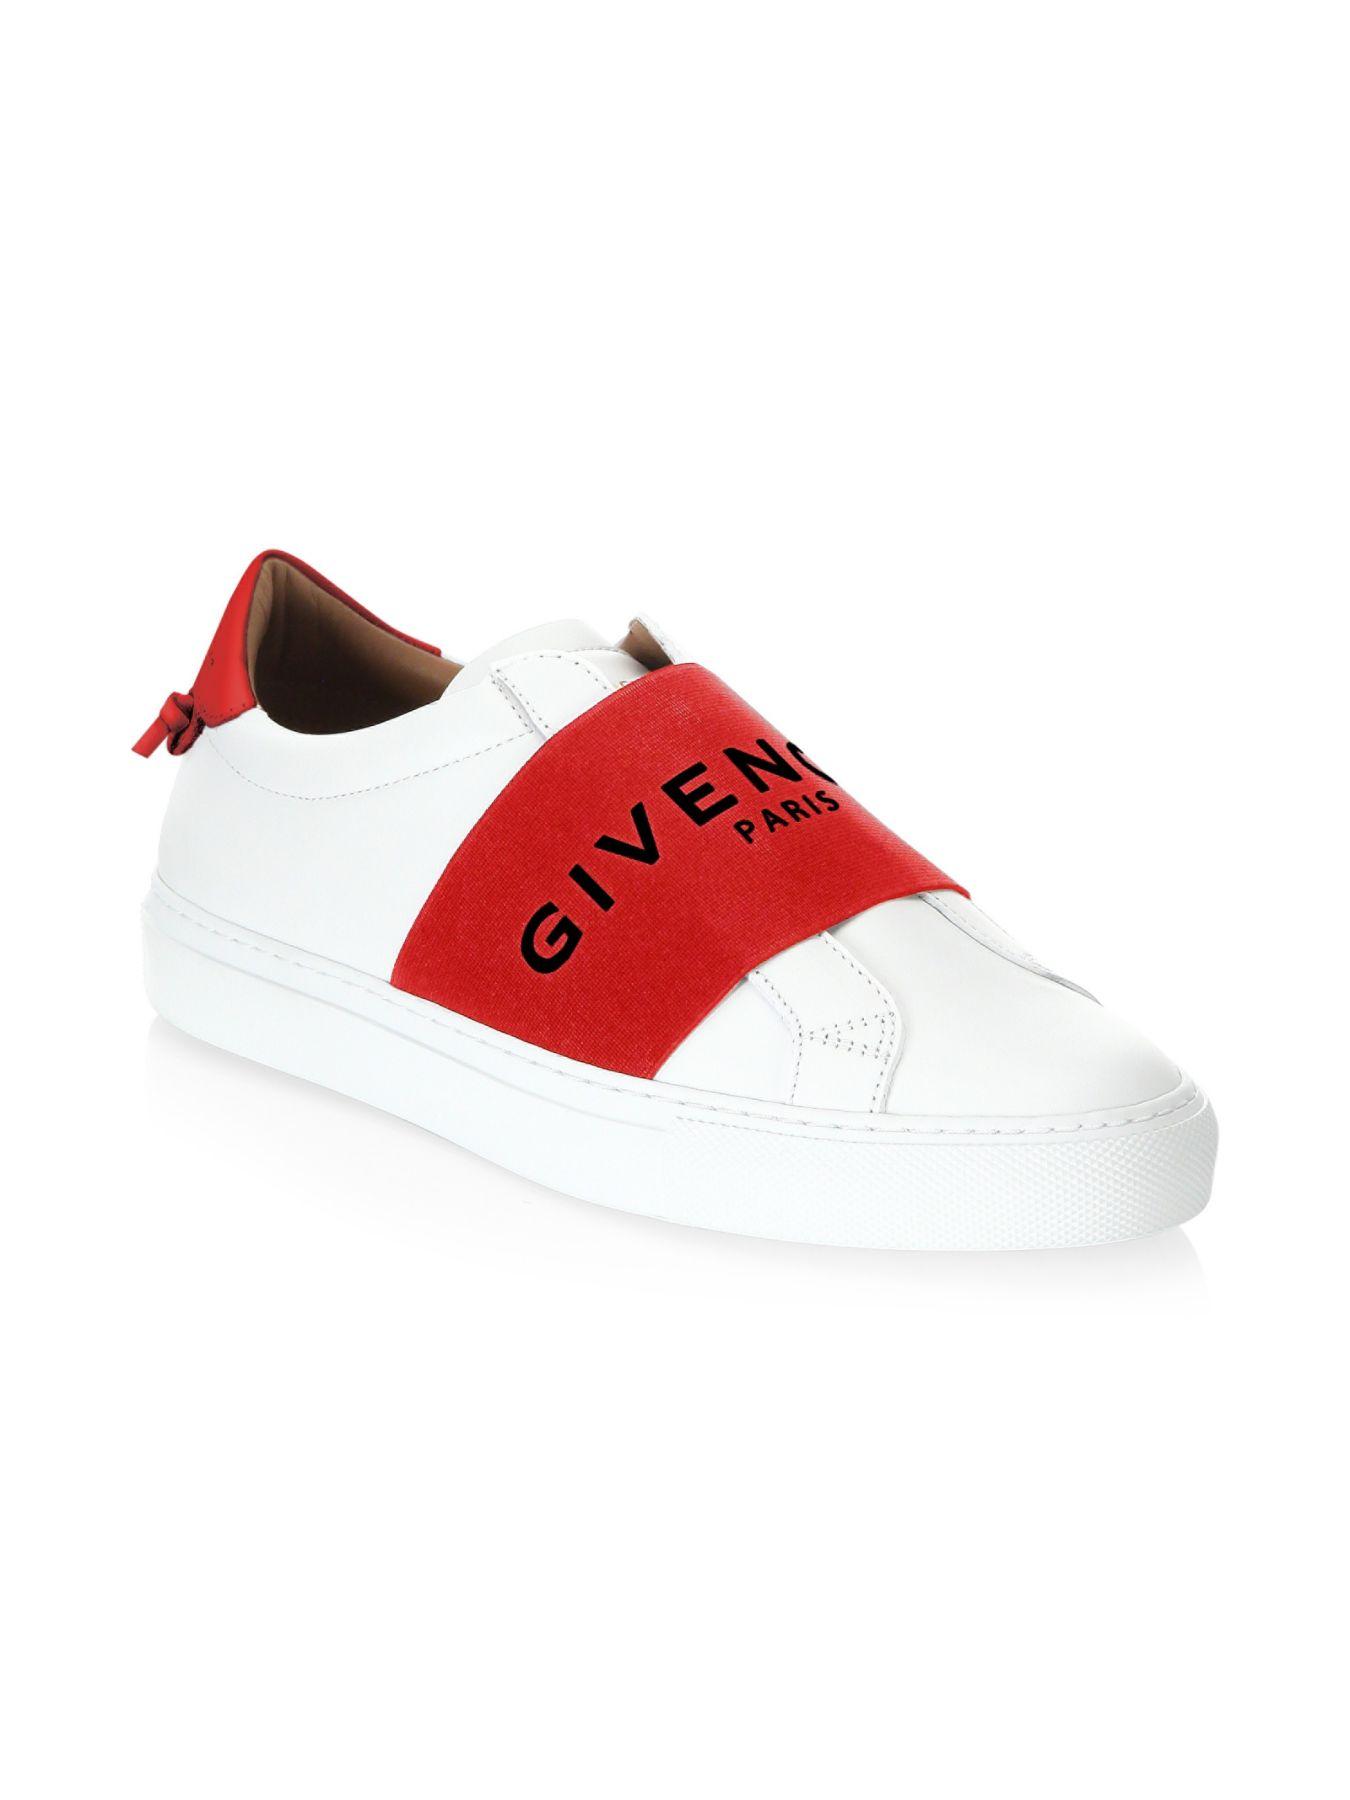 Strap Urban Knots Sneakers in White 